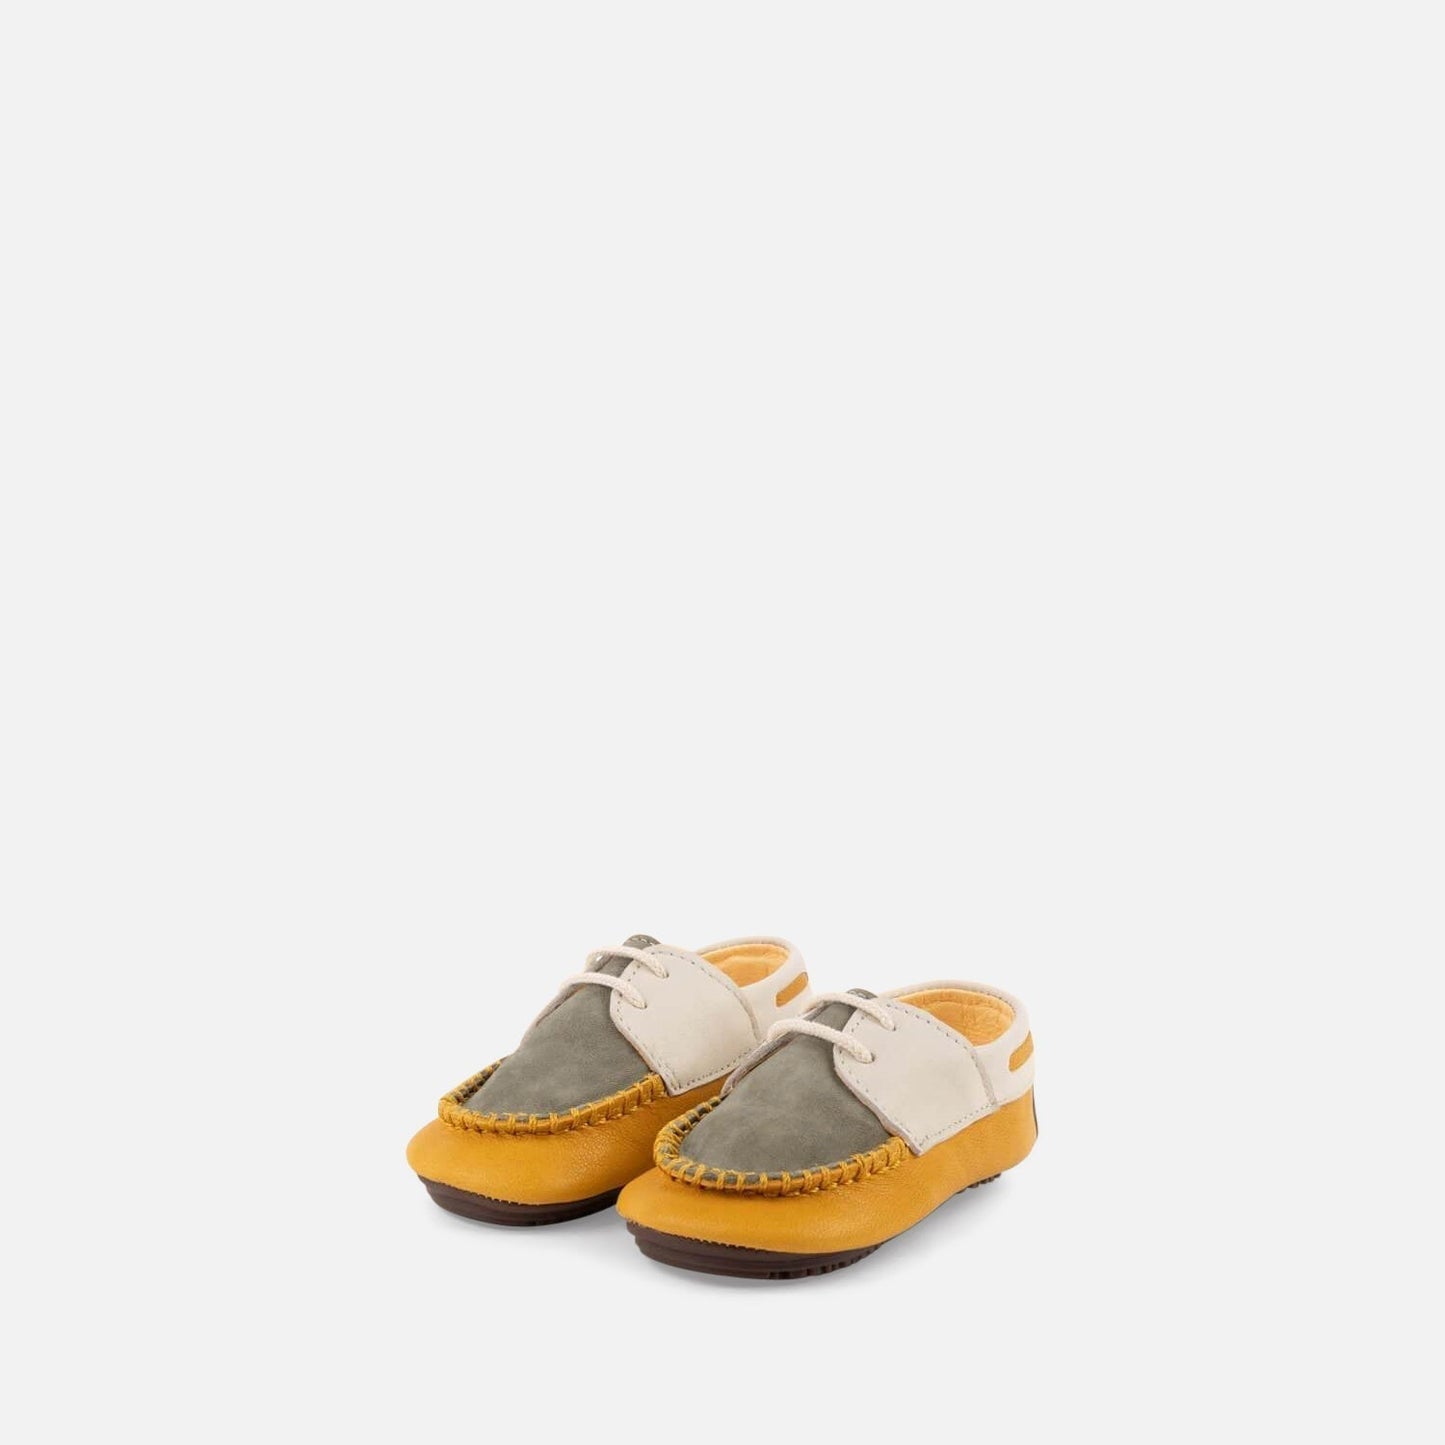 Green/Mustard Boat Shoes Shoes & Booties Dulis Shoes 